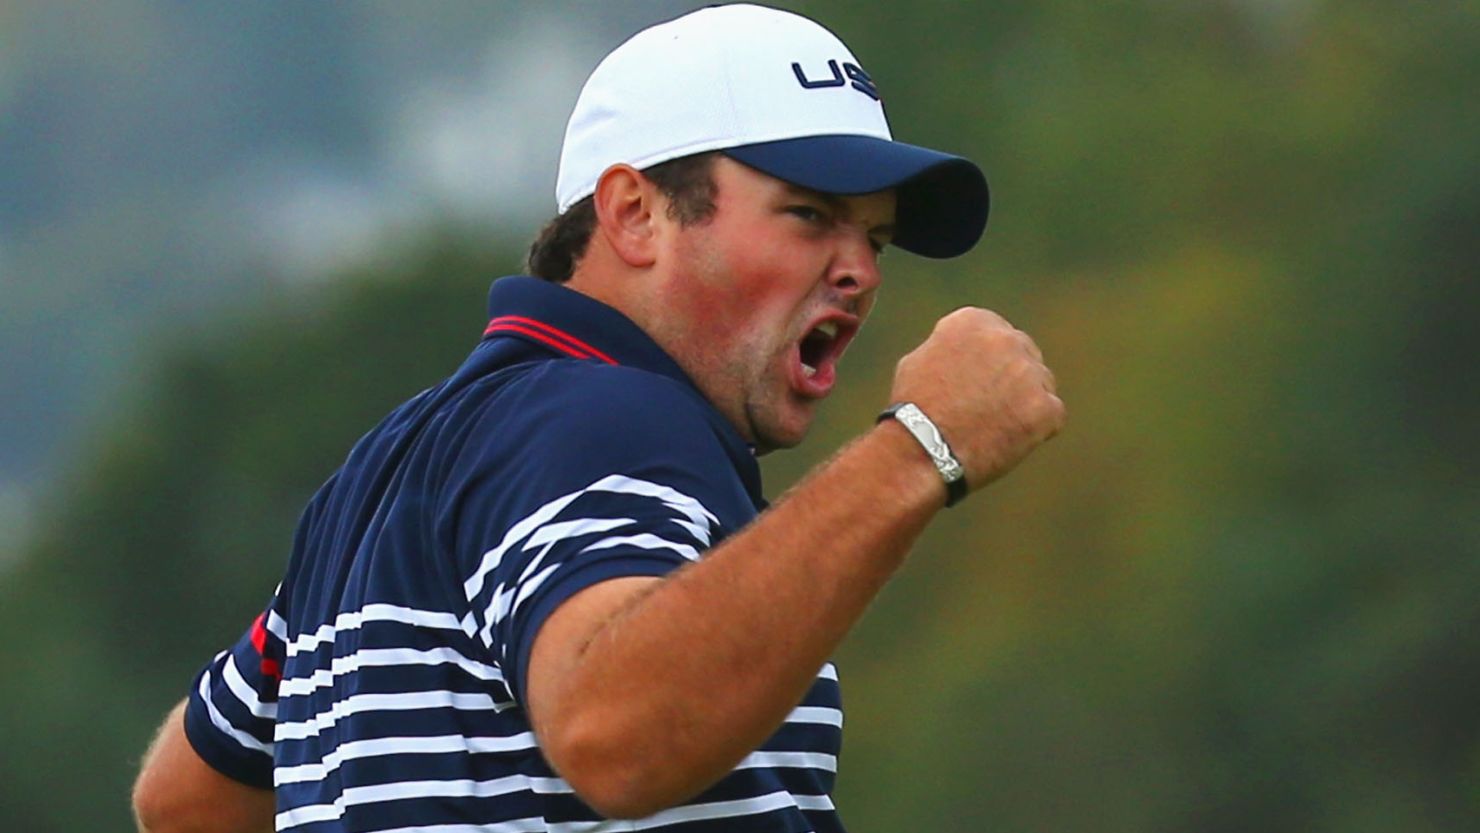 The performances of rookie Patrick Reed were a positive for Team USA in its Ryder Cup defeat to Europe